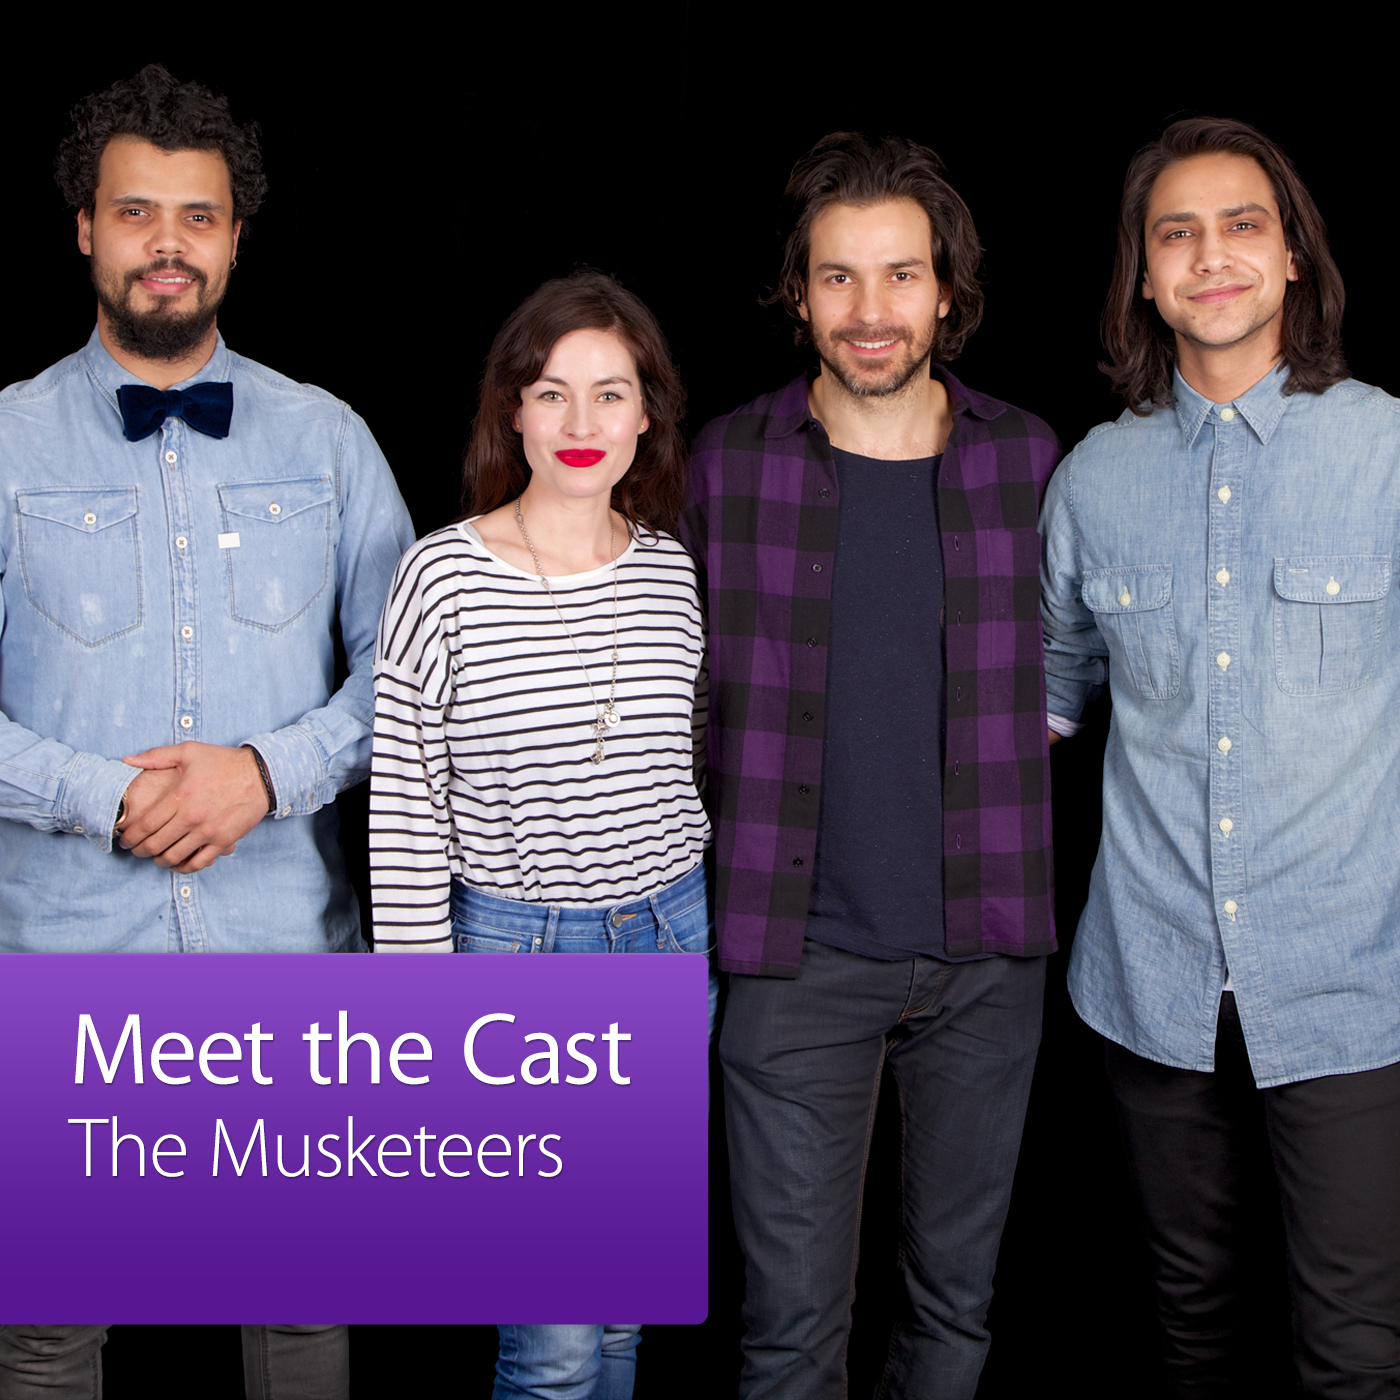 The Musketeers: Meet the Cast